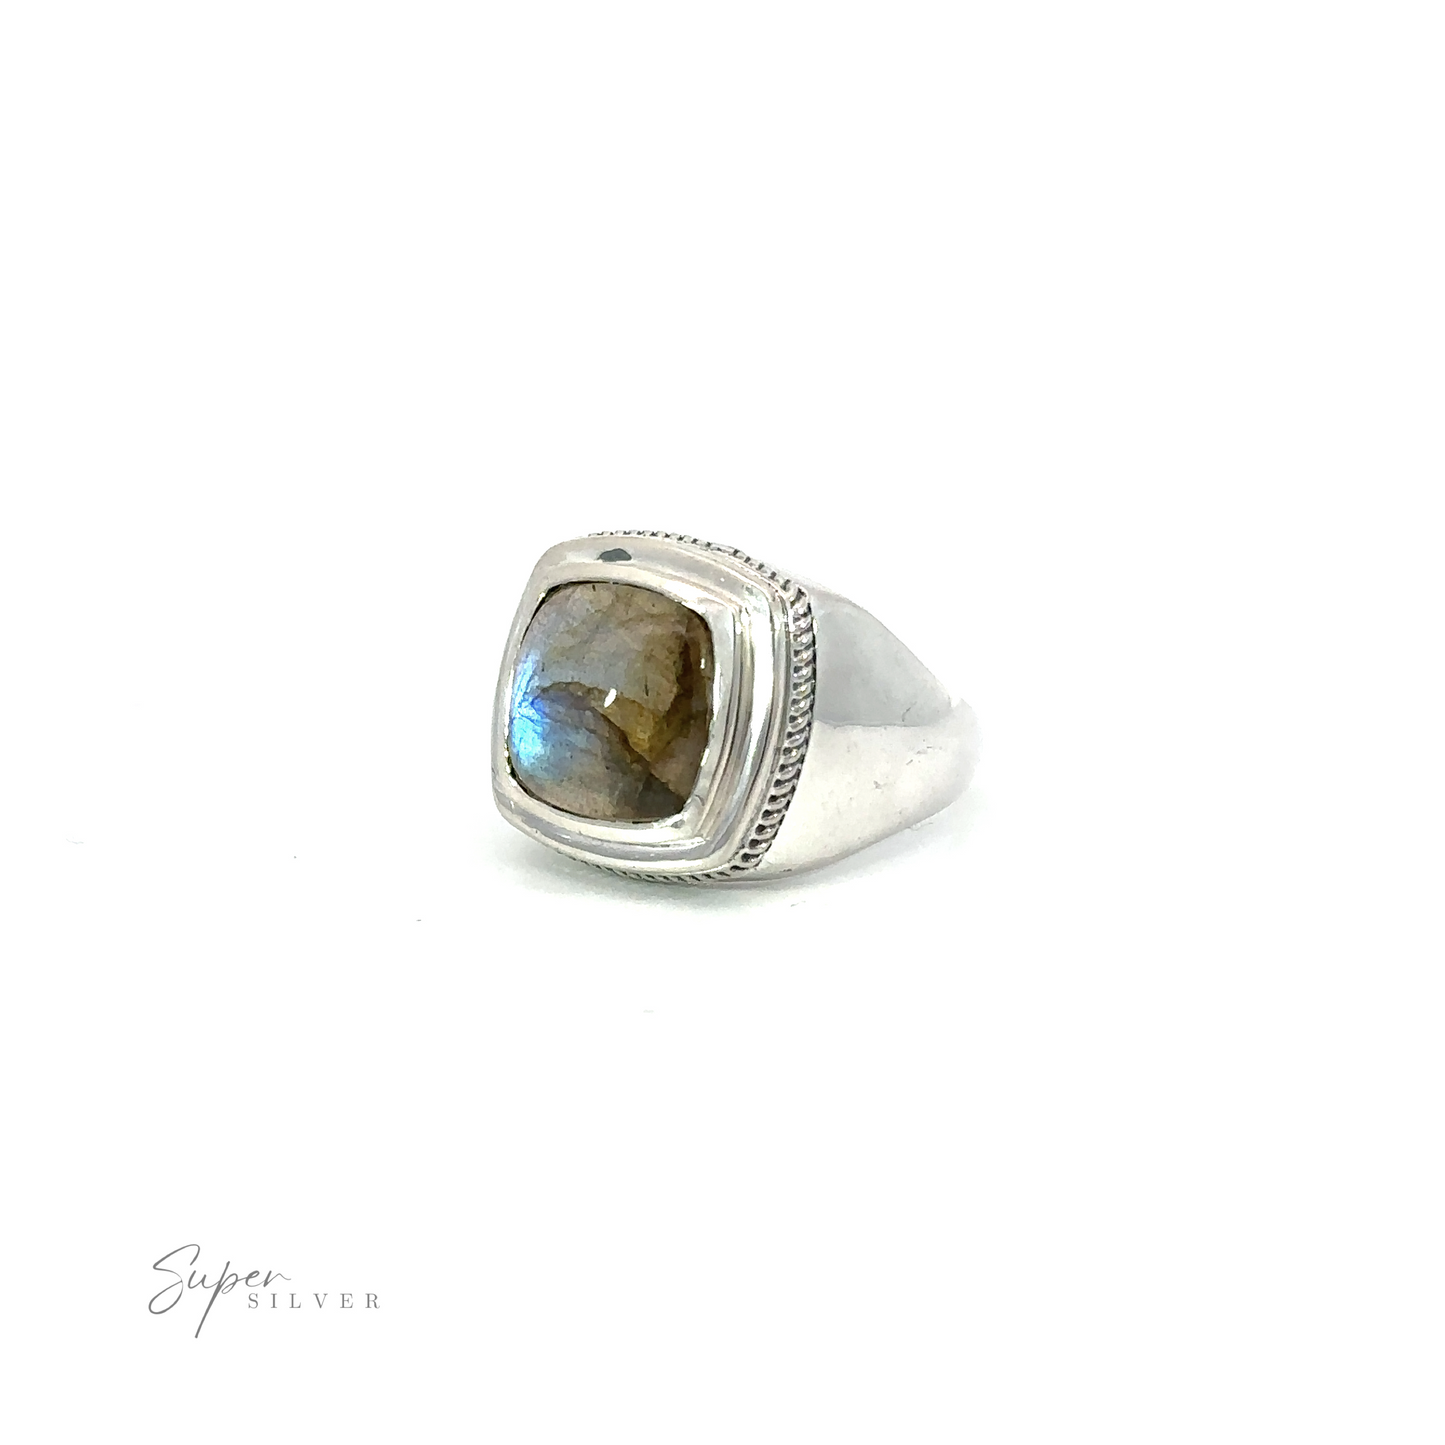 A modern silver Square Stone Signet Ring adorned with a stunning labradorite stone, perfect for adding a touch of elegance to any attire.